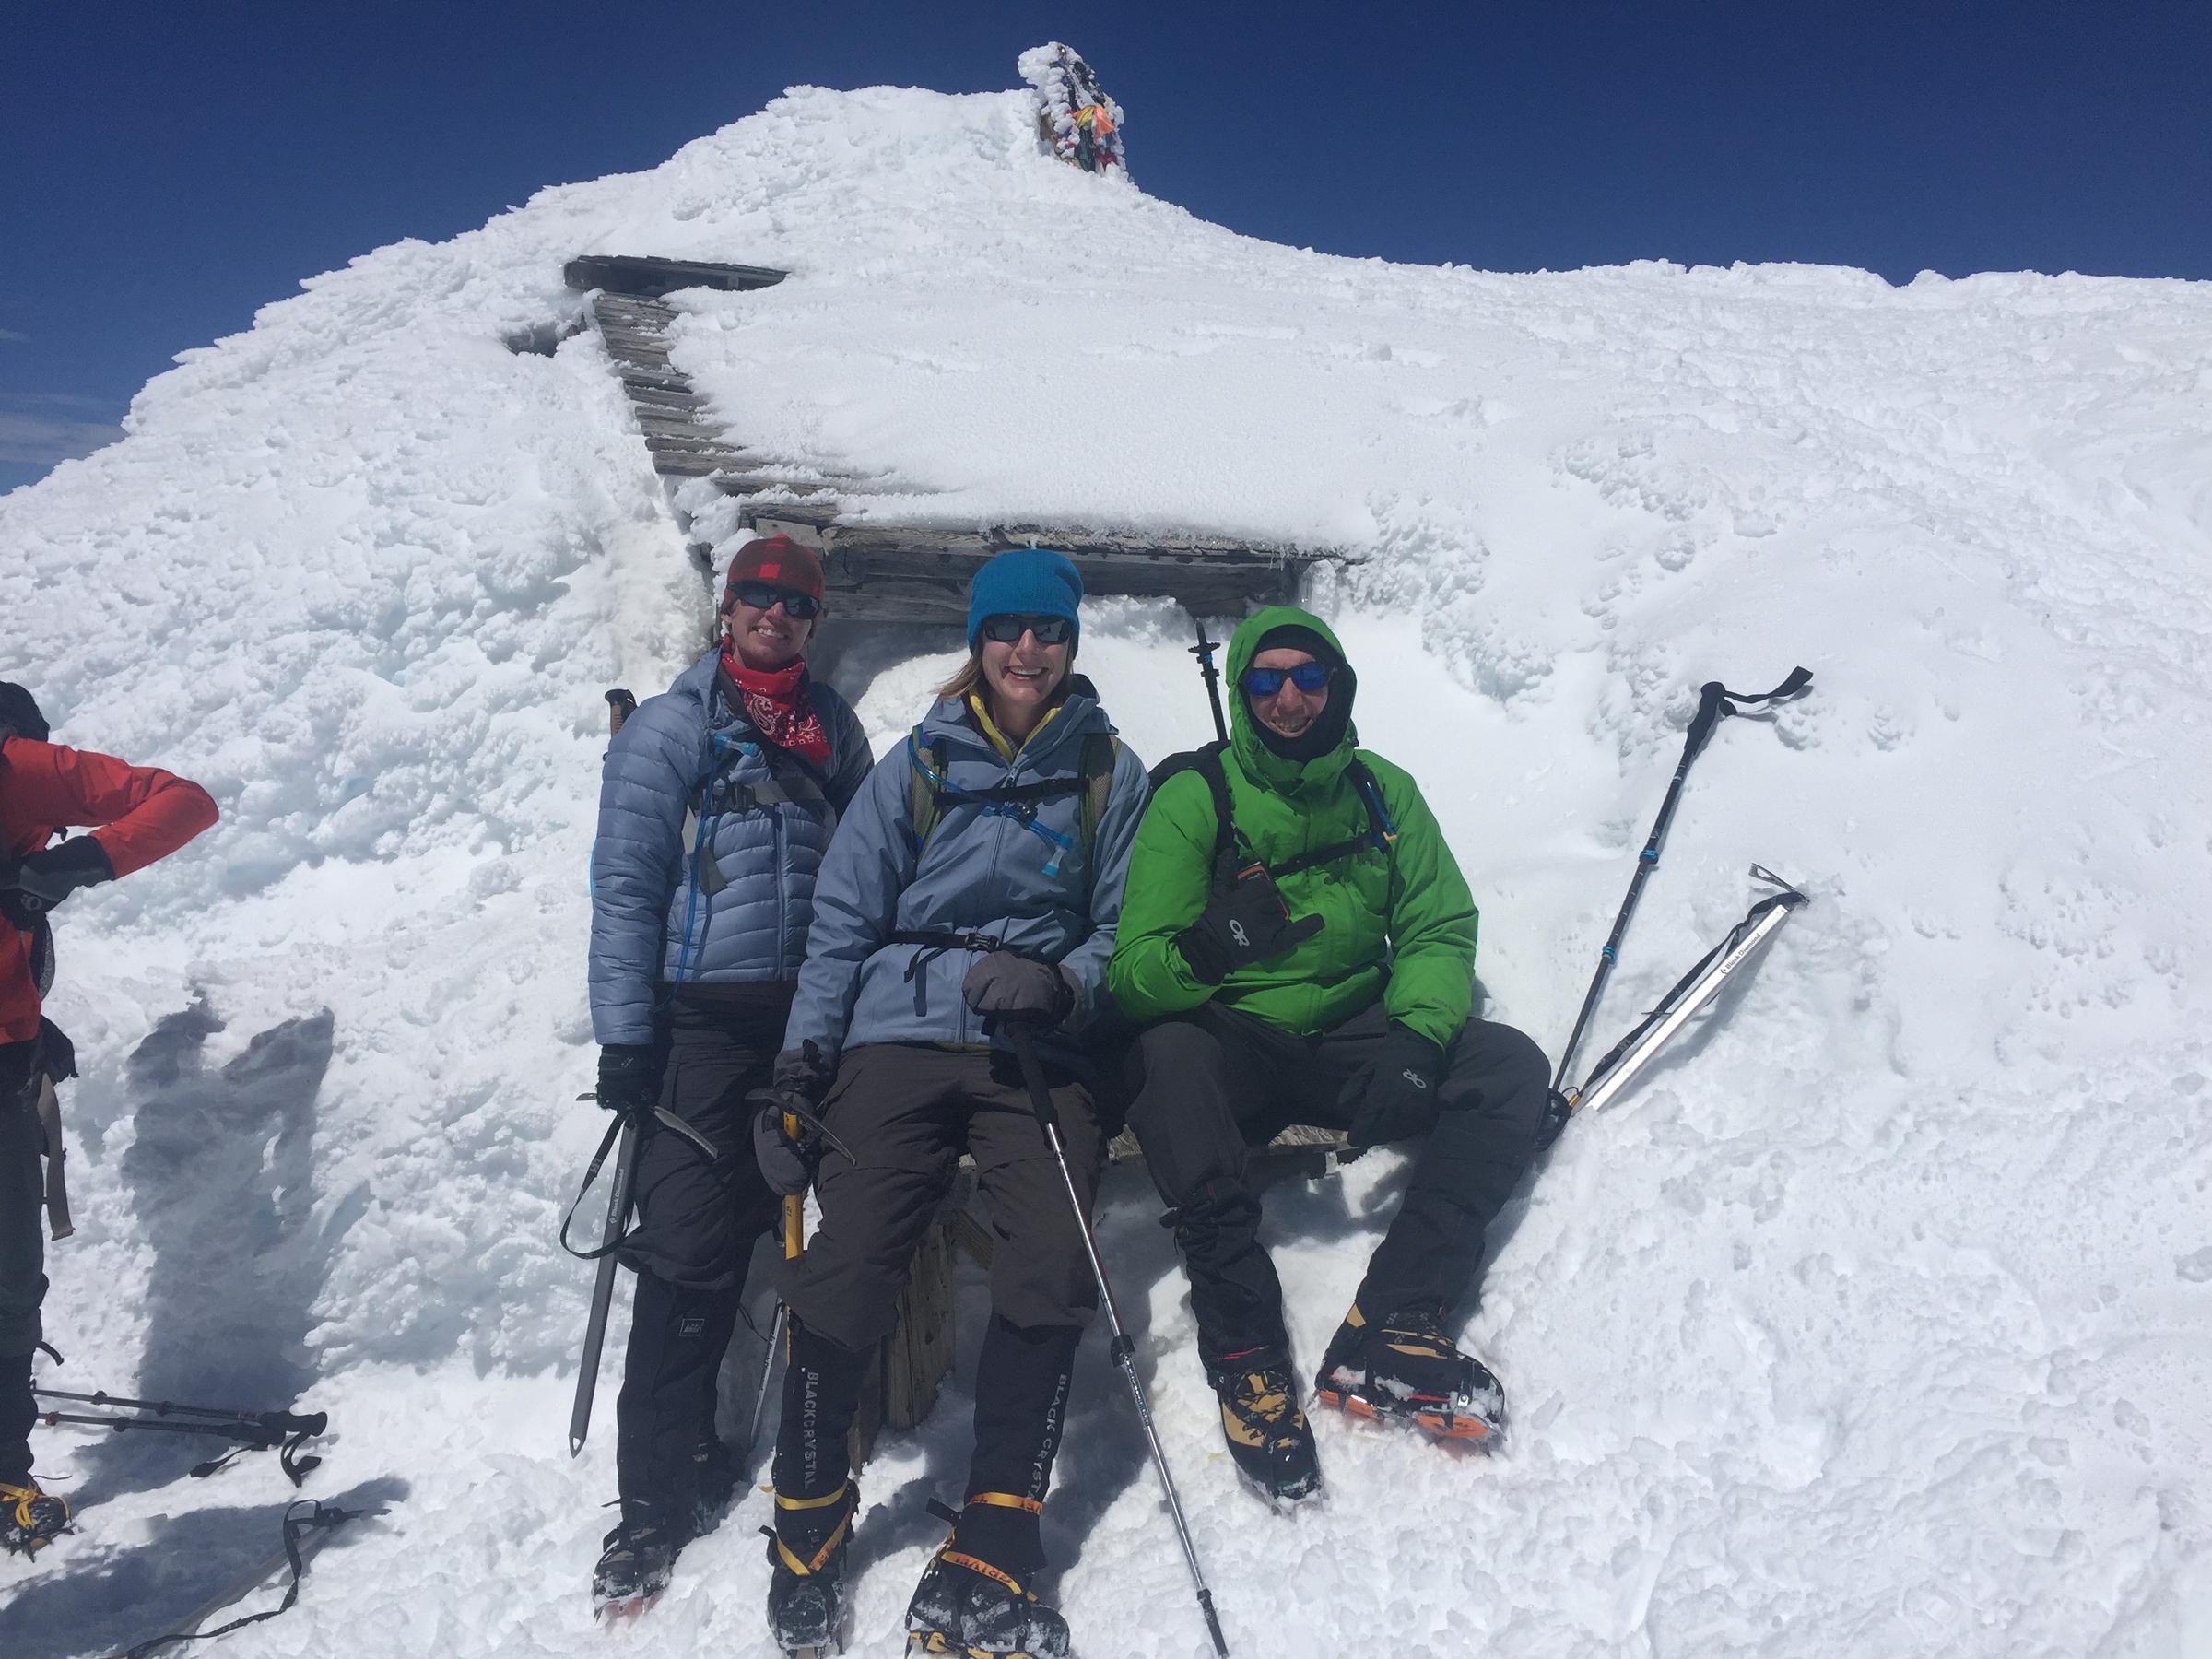 A First Climb Up Mount Adams - Northwest Public Broadcasting